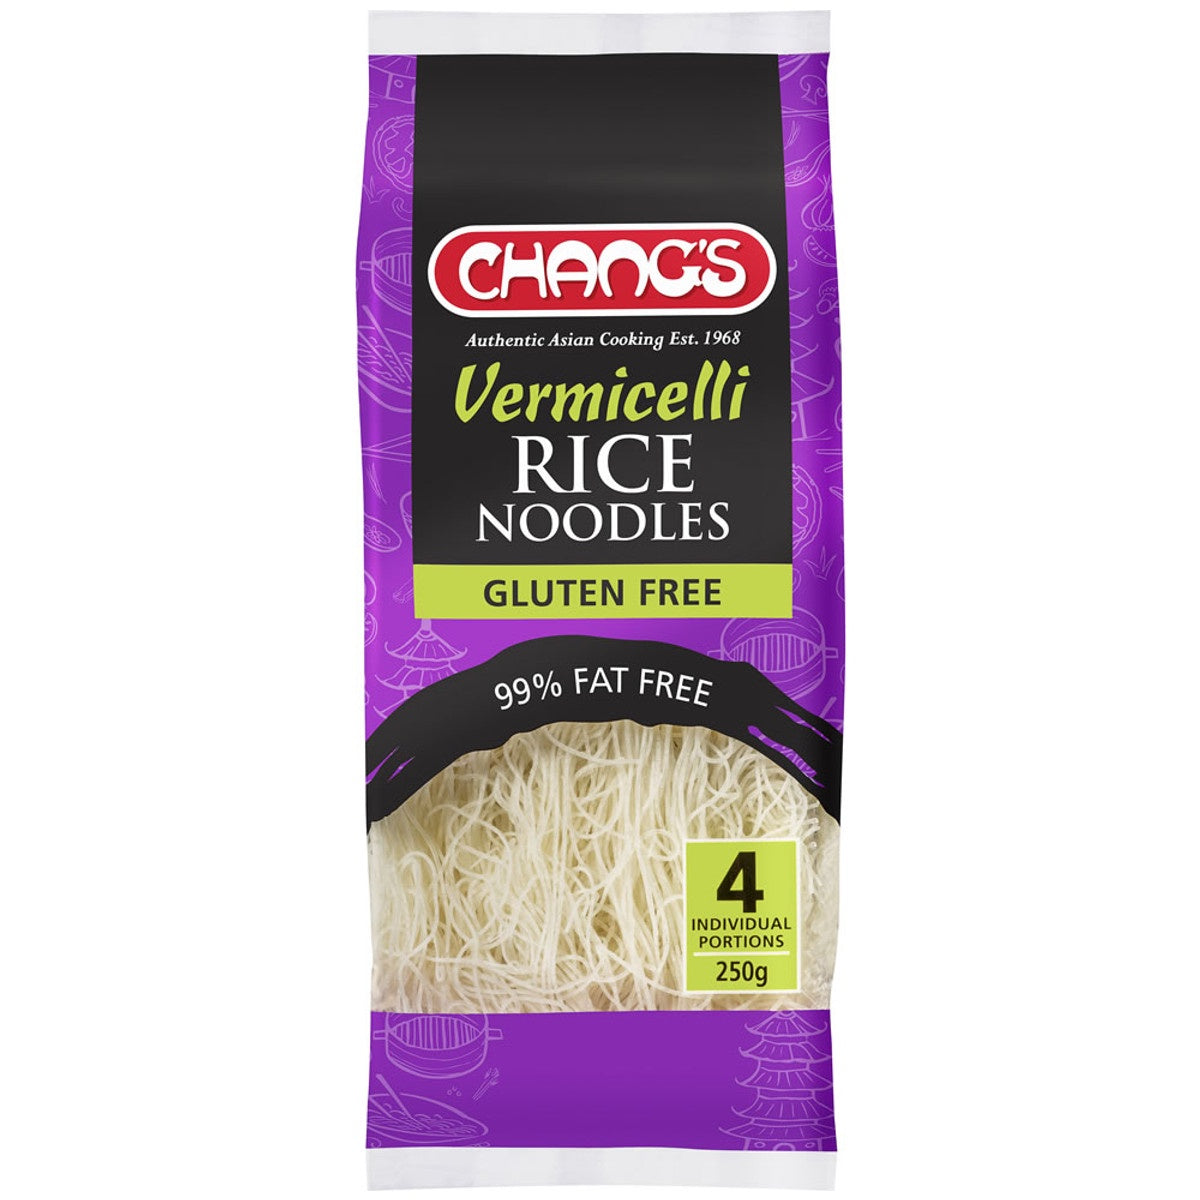 Chang's Rice Noodles Vermicelli GF 250g